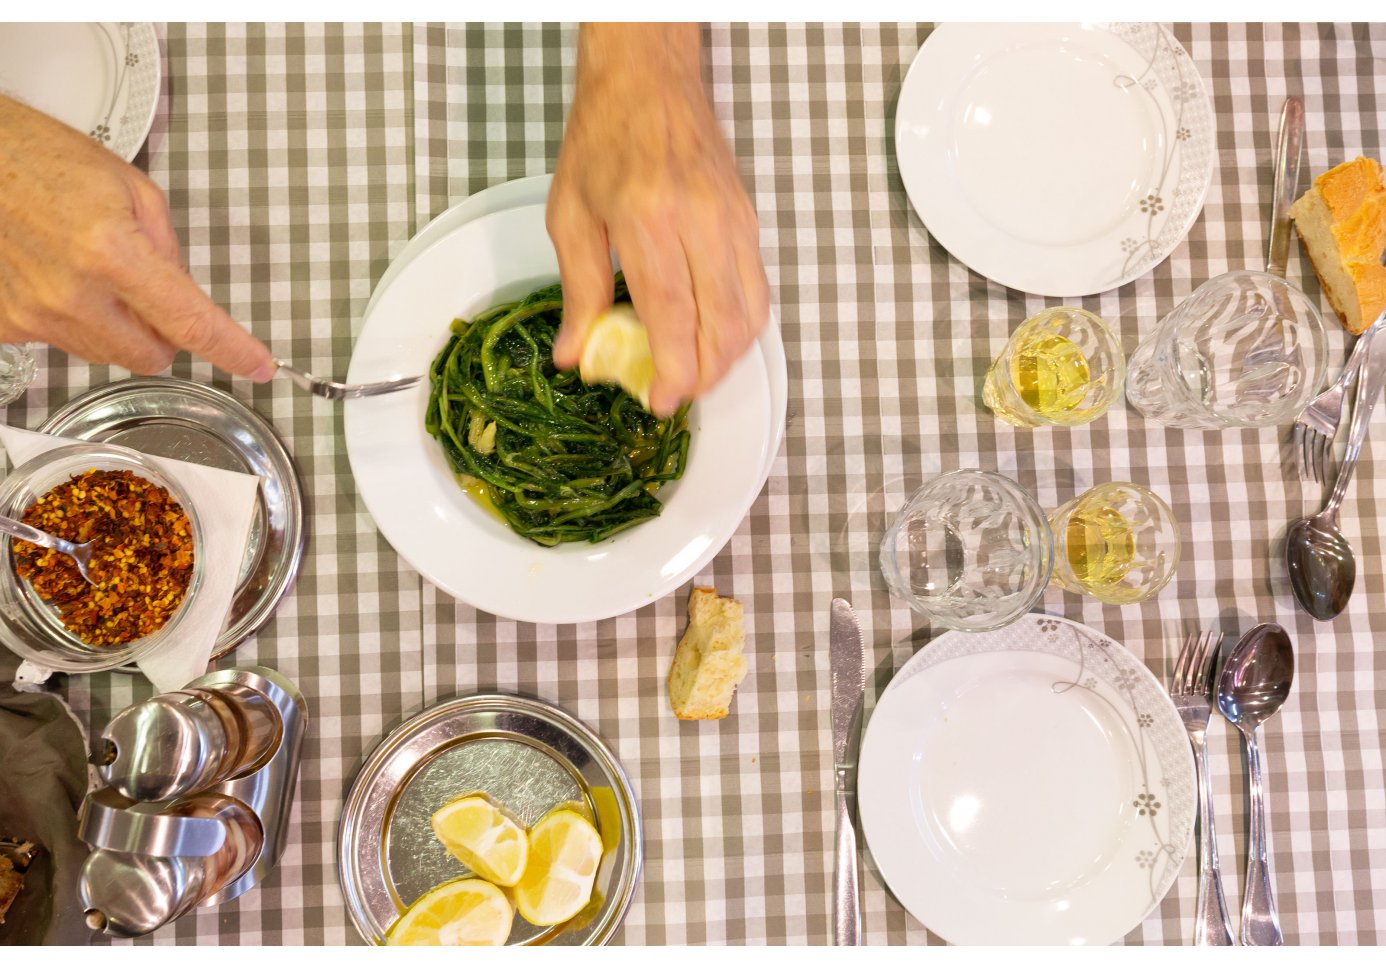 A man squeezing lemon over a dish of greens in Ipirus taverna in Athens